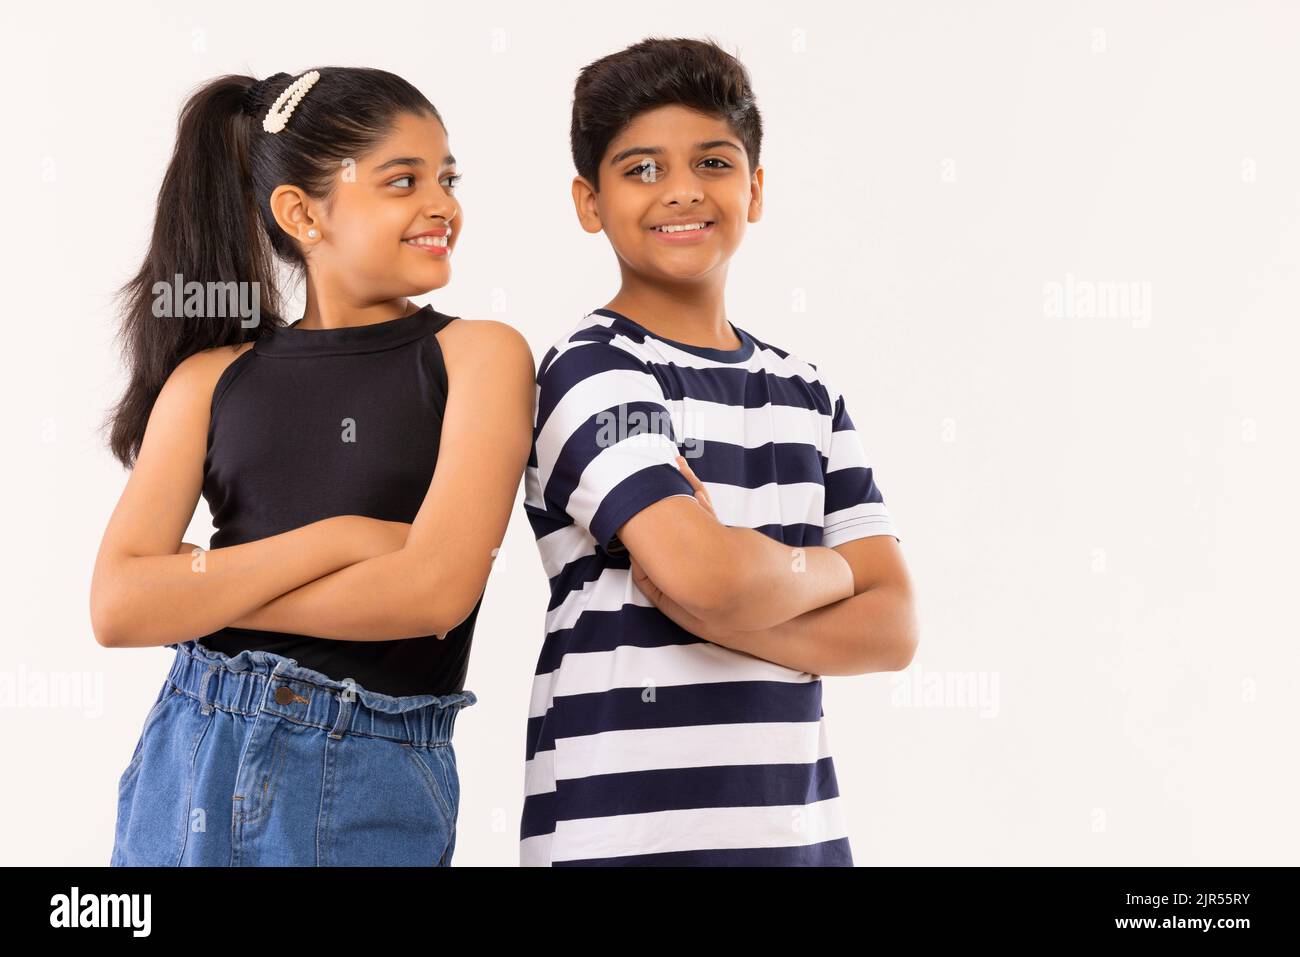 Cheerful boy and girl standing together with crossed arms Stock Photo